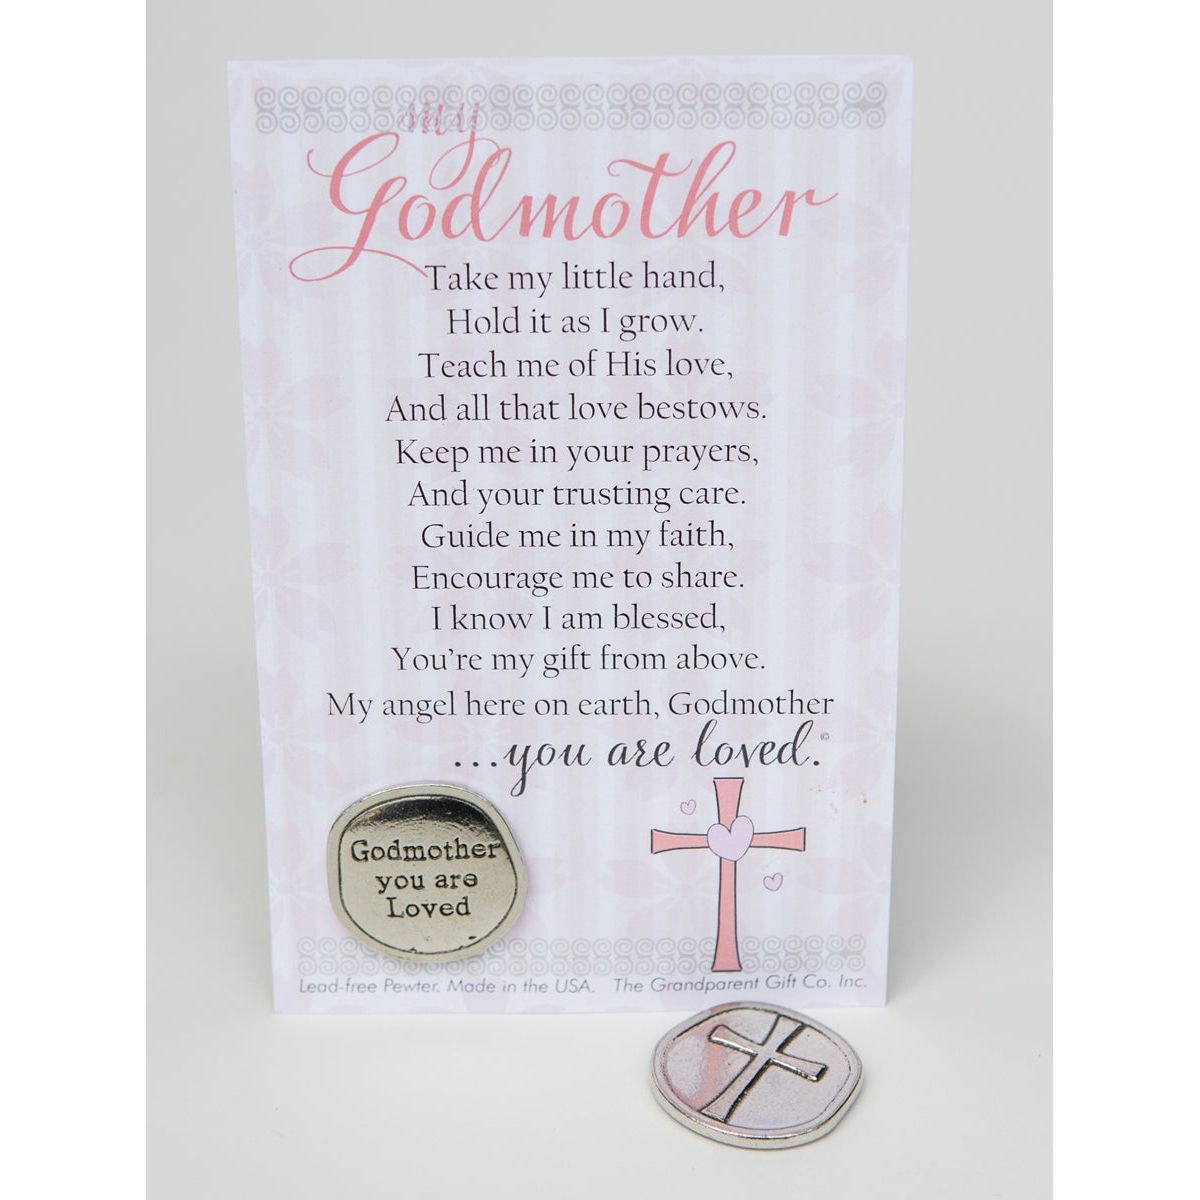 Godmother Gift: Handmade pewter coin with "Godmother you are Loved" on one side and a cross on the other, packaged in a clear bag with "My Godmother" poem.